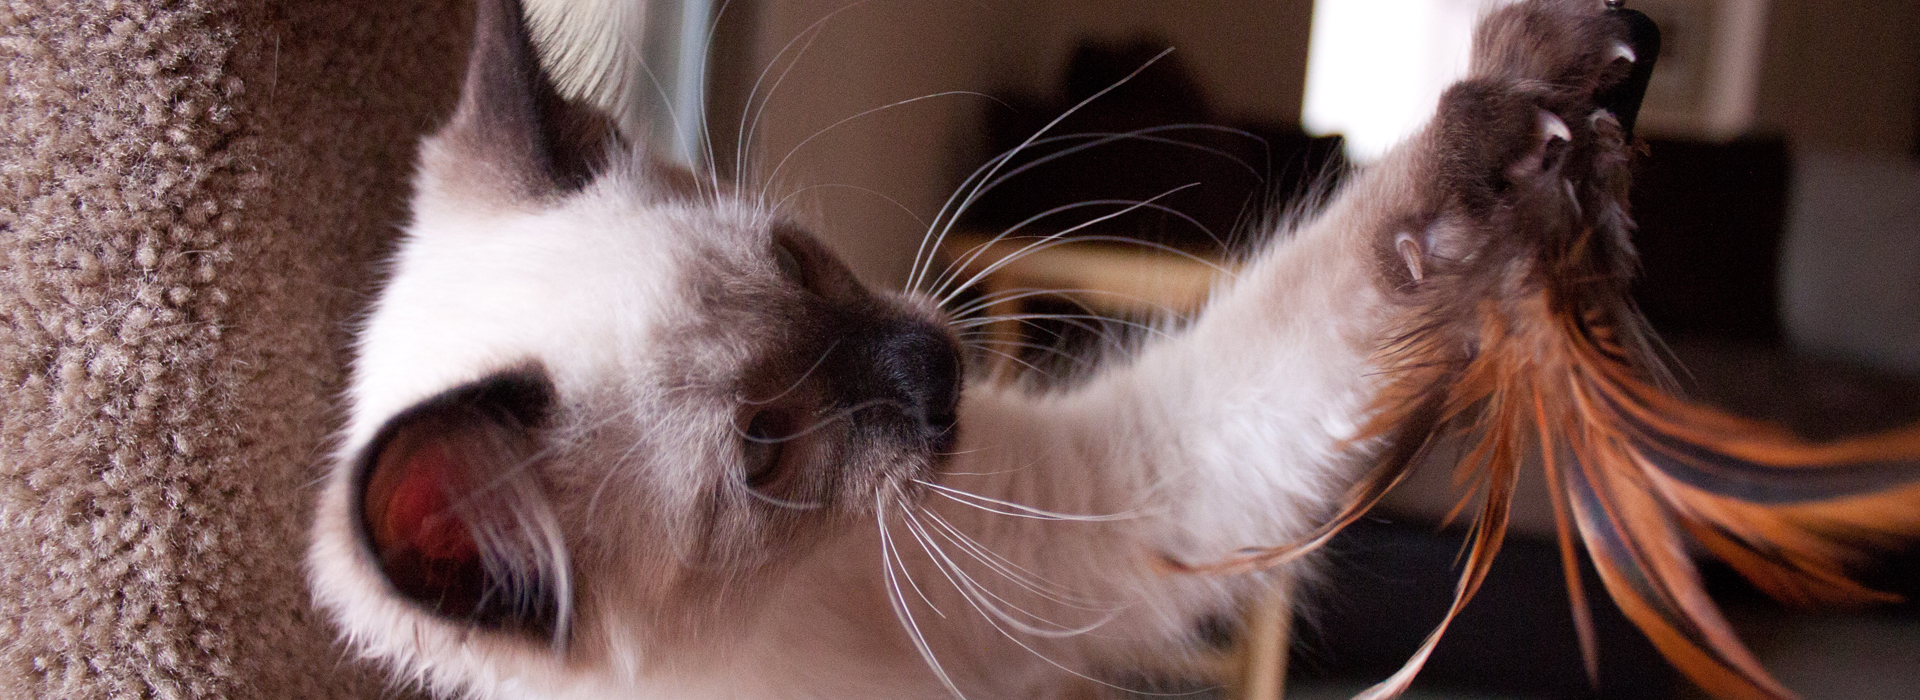 Eight wek old Siamese kitten plays with a suspended feather